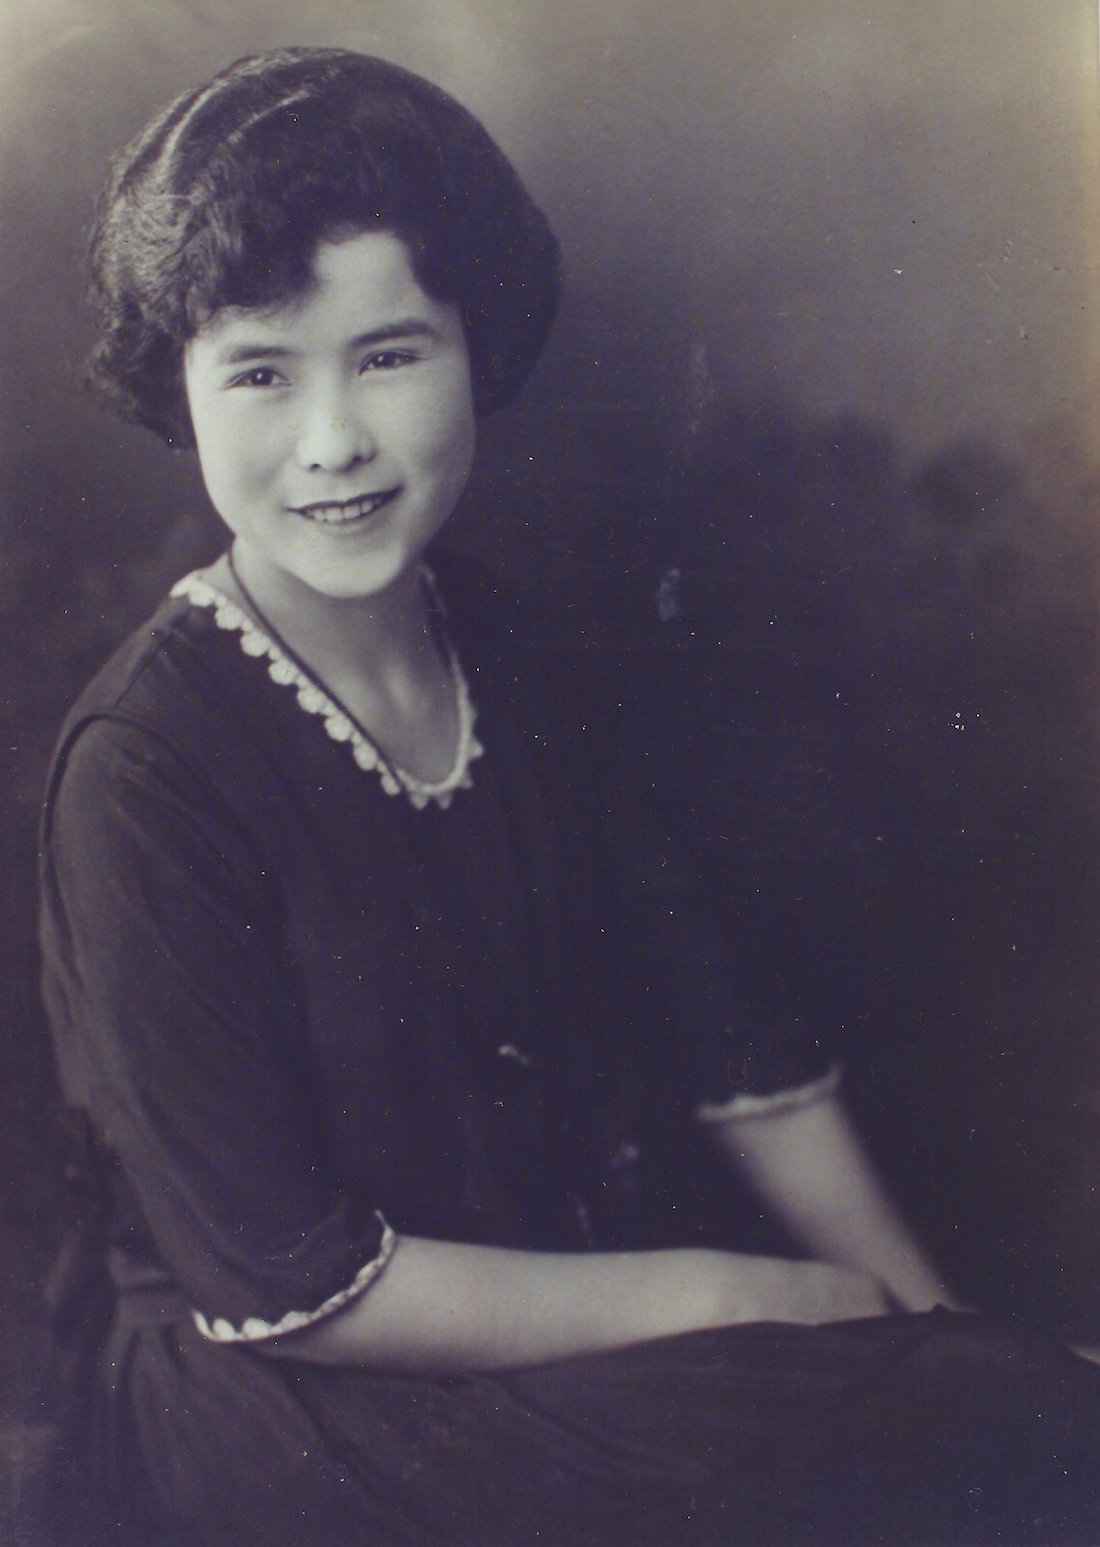 Early 1900s photo of Lani’s Aunty Madge, her paternal grandfather’s sister who was like a grandparent to Lani because her maternal grandparents died young.